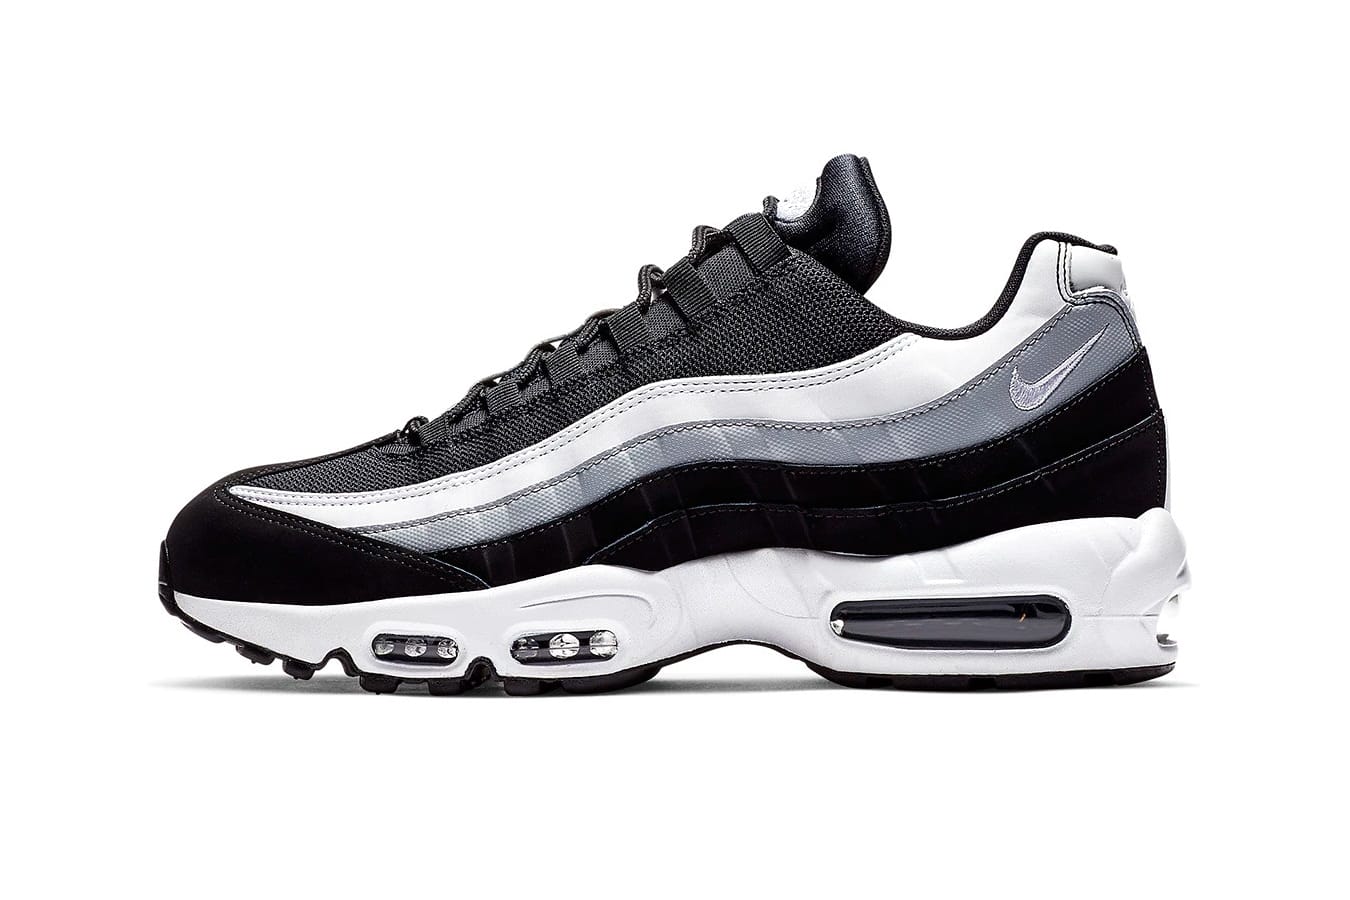 all grey 95s